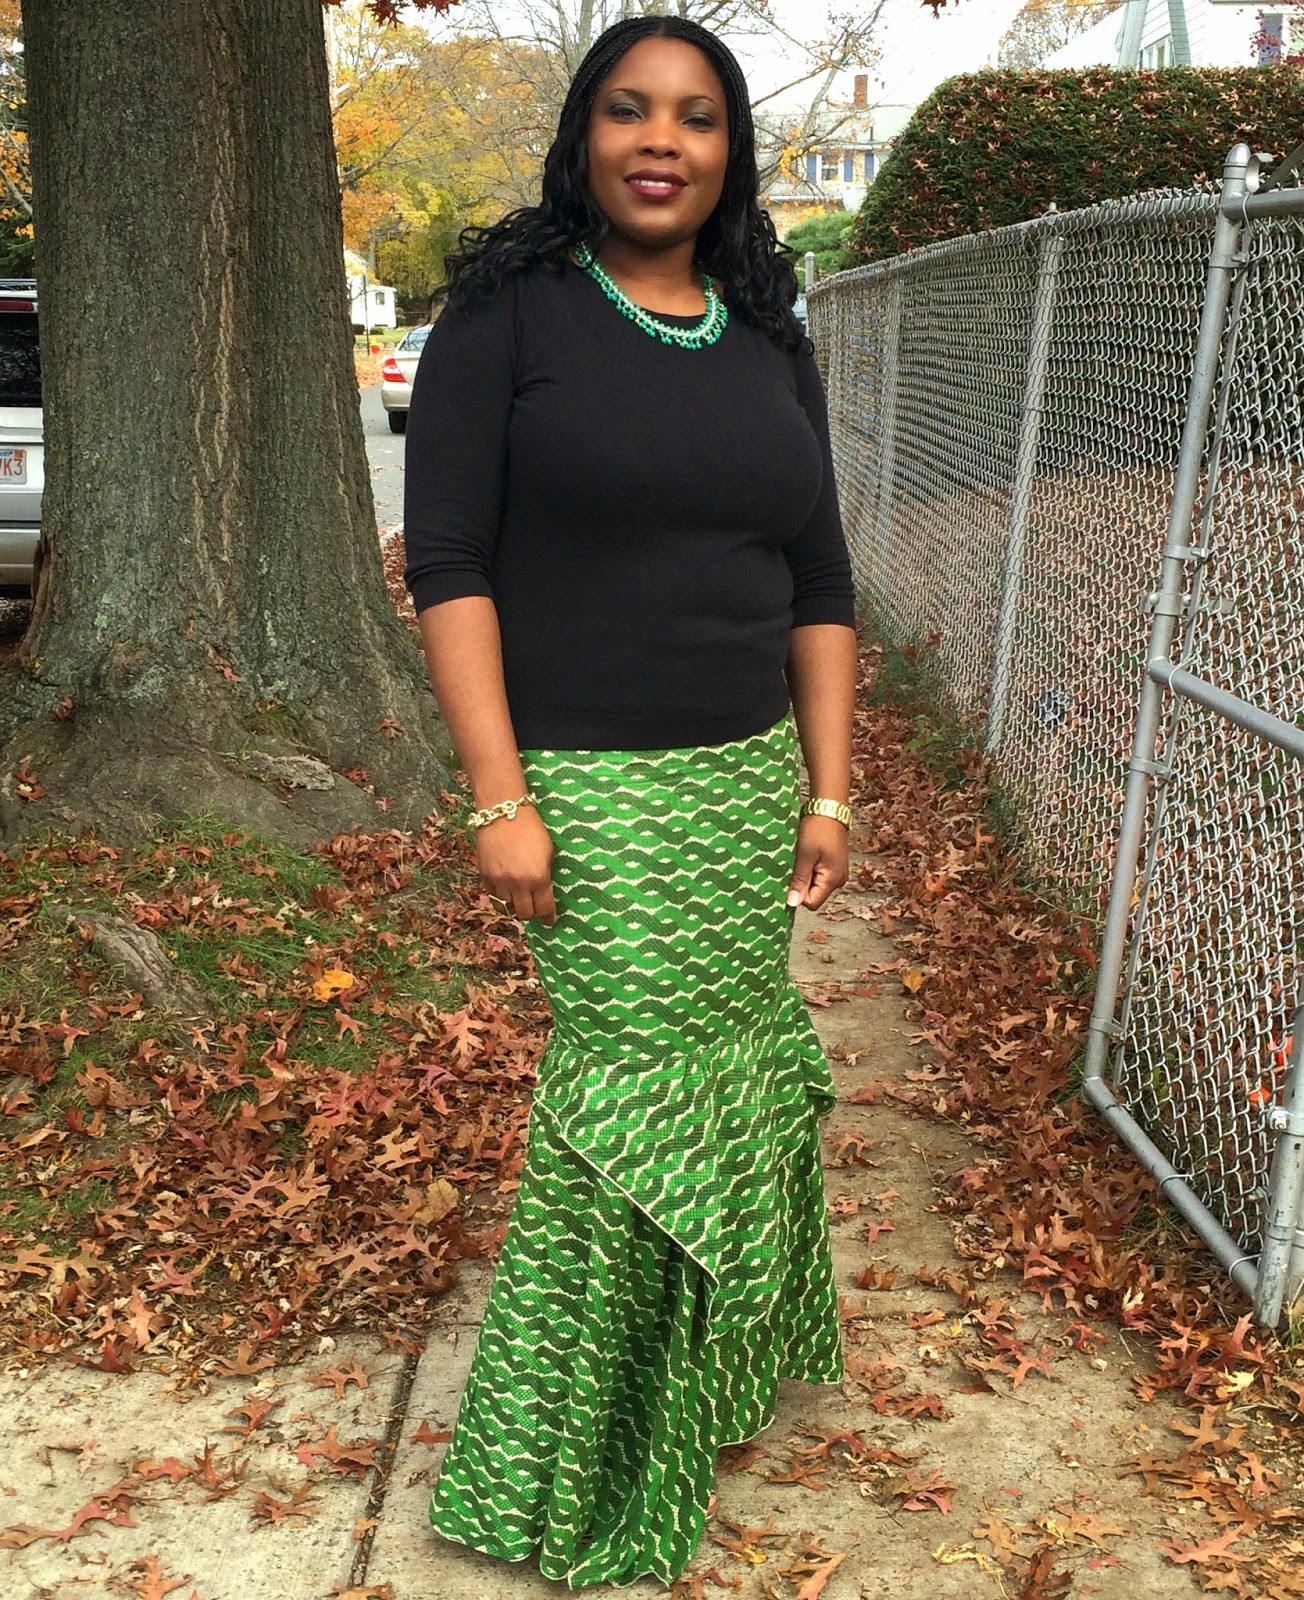 Beauty Style Growth: Hybrid Outfit: Black Sweater and African Print Skirt